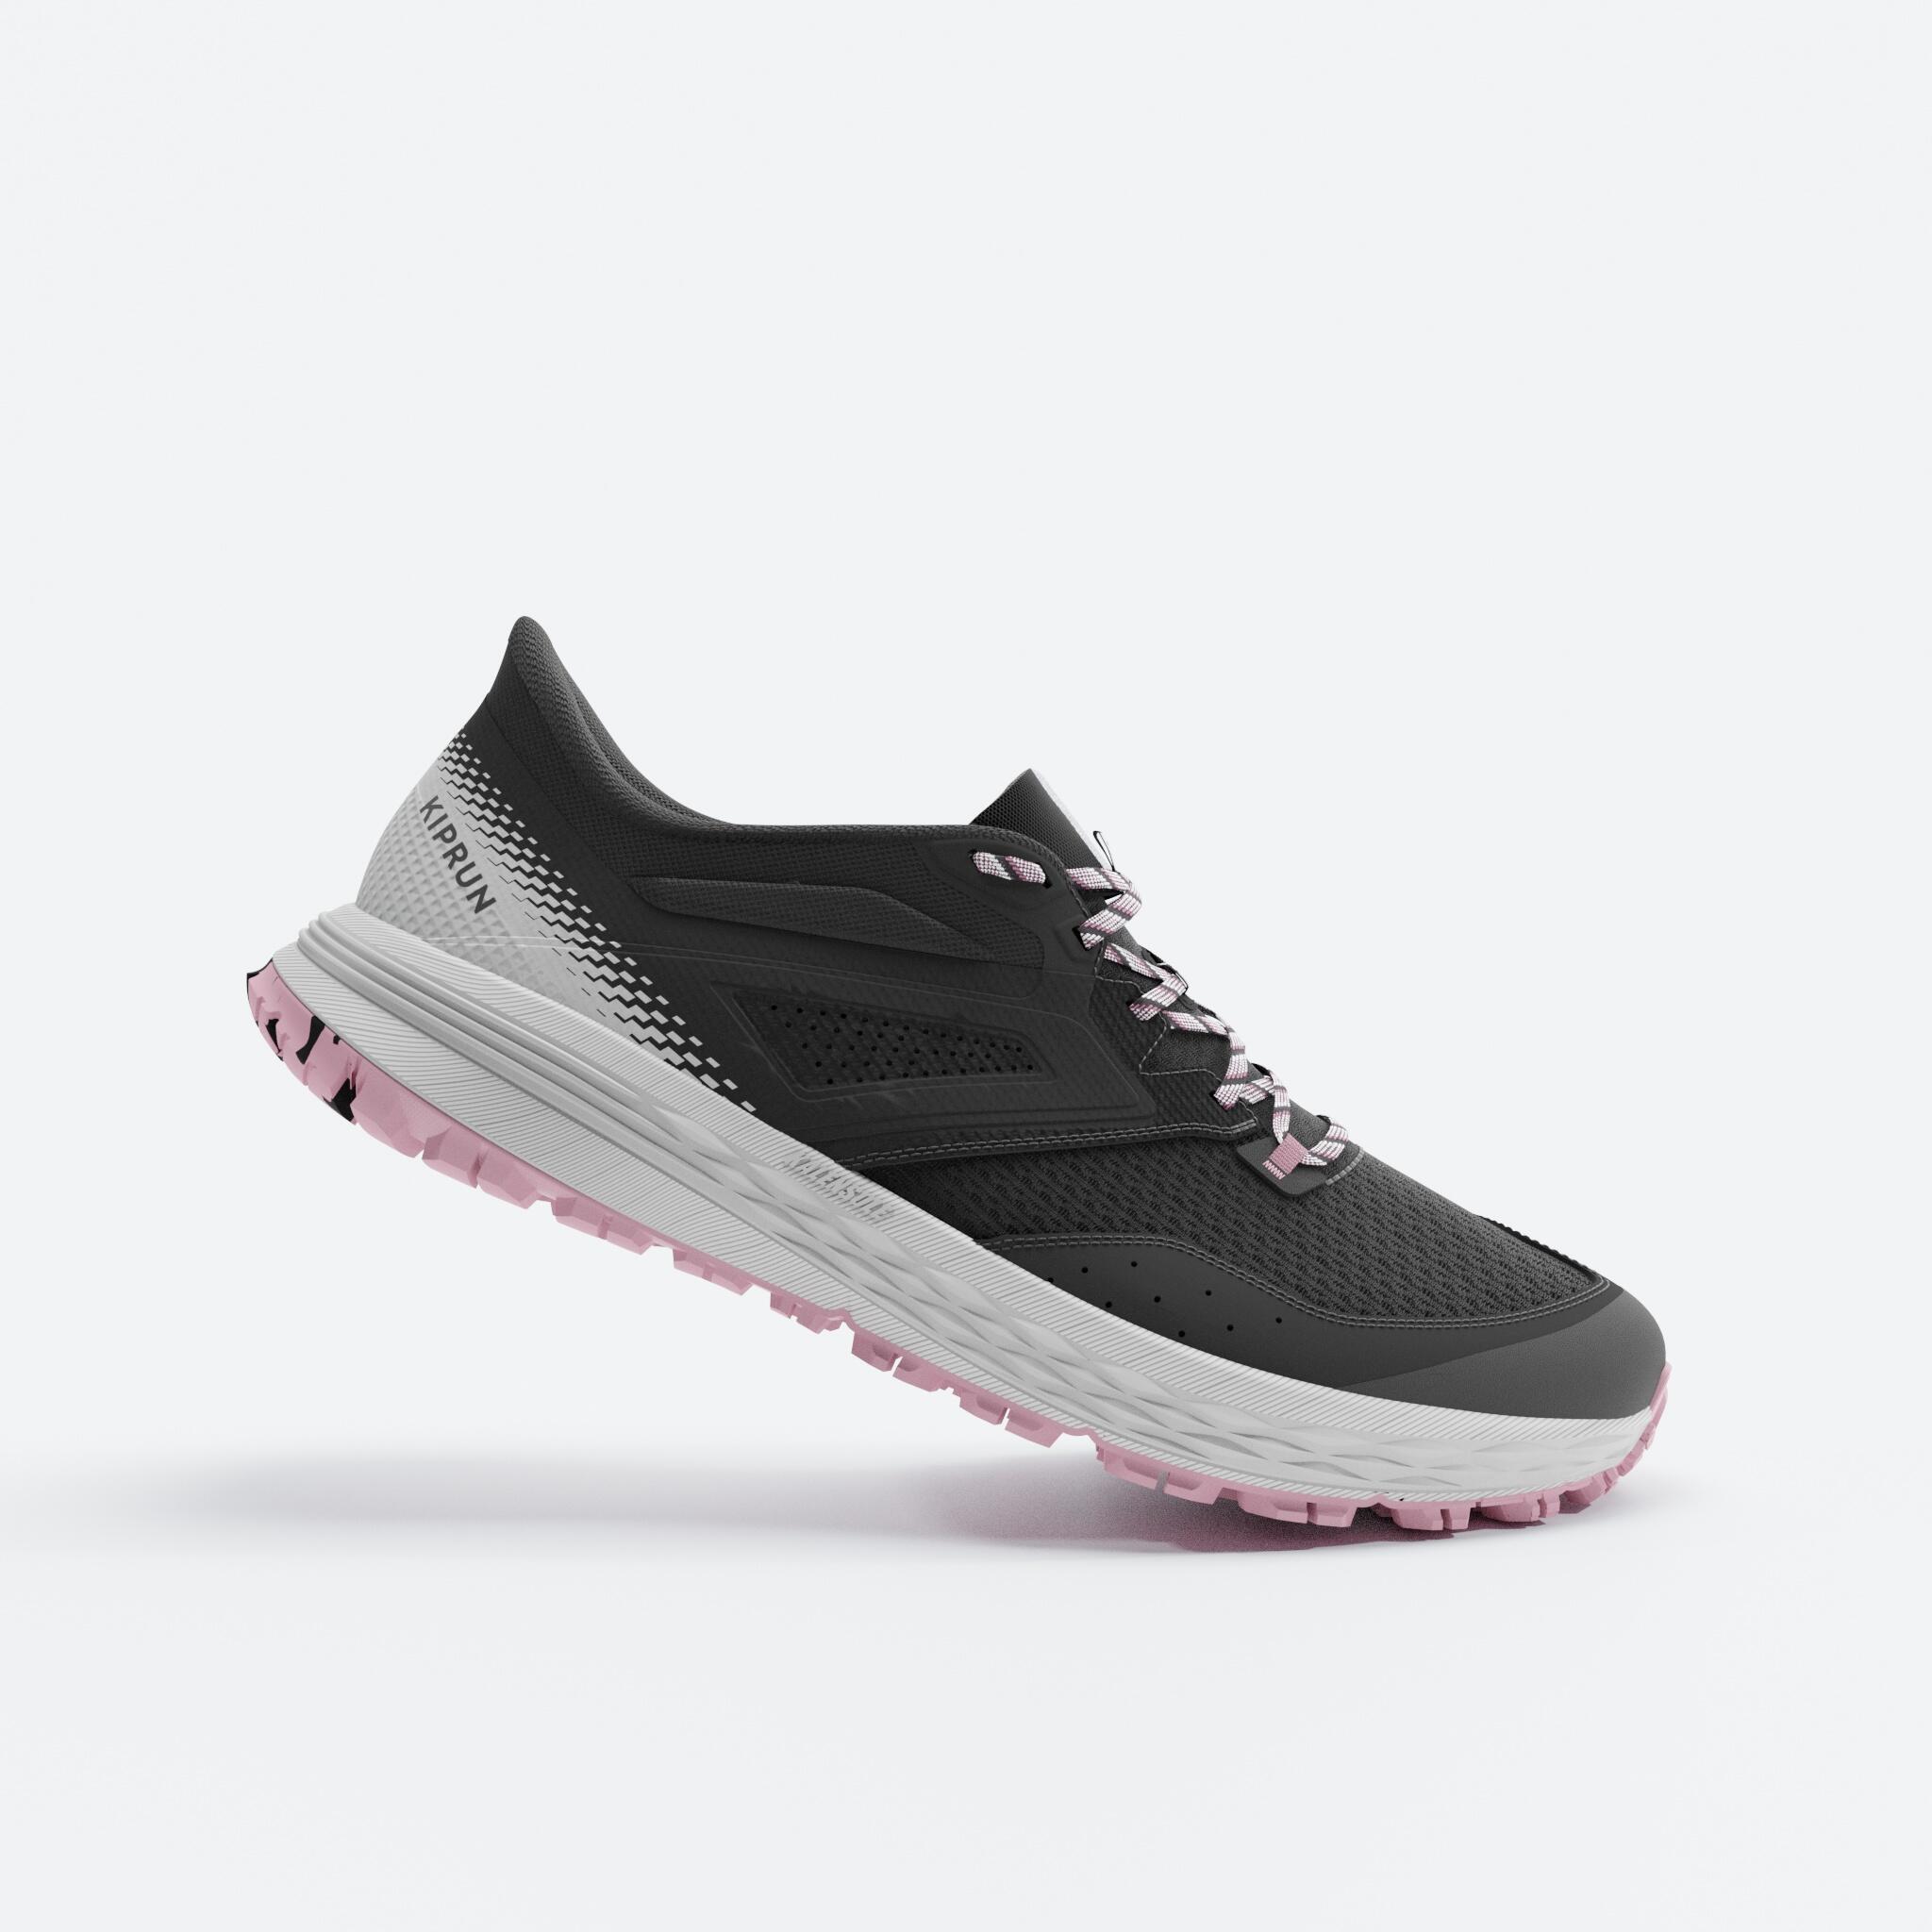 EVADICT WOMEN's TRAIL RUNNING SHOES TR2 - carbon grey button/pink